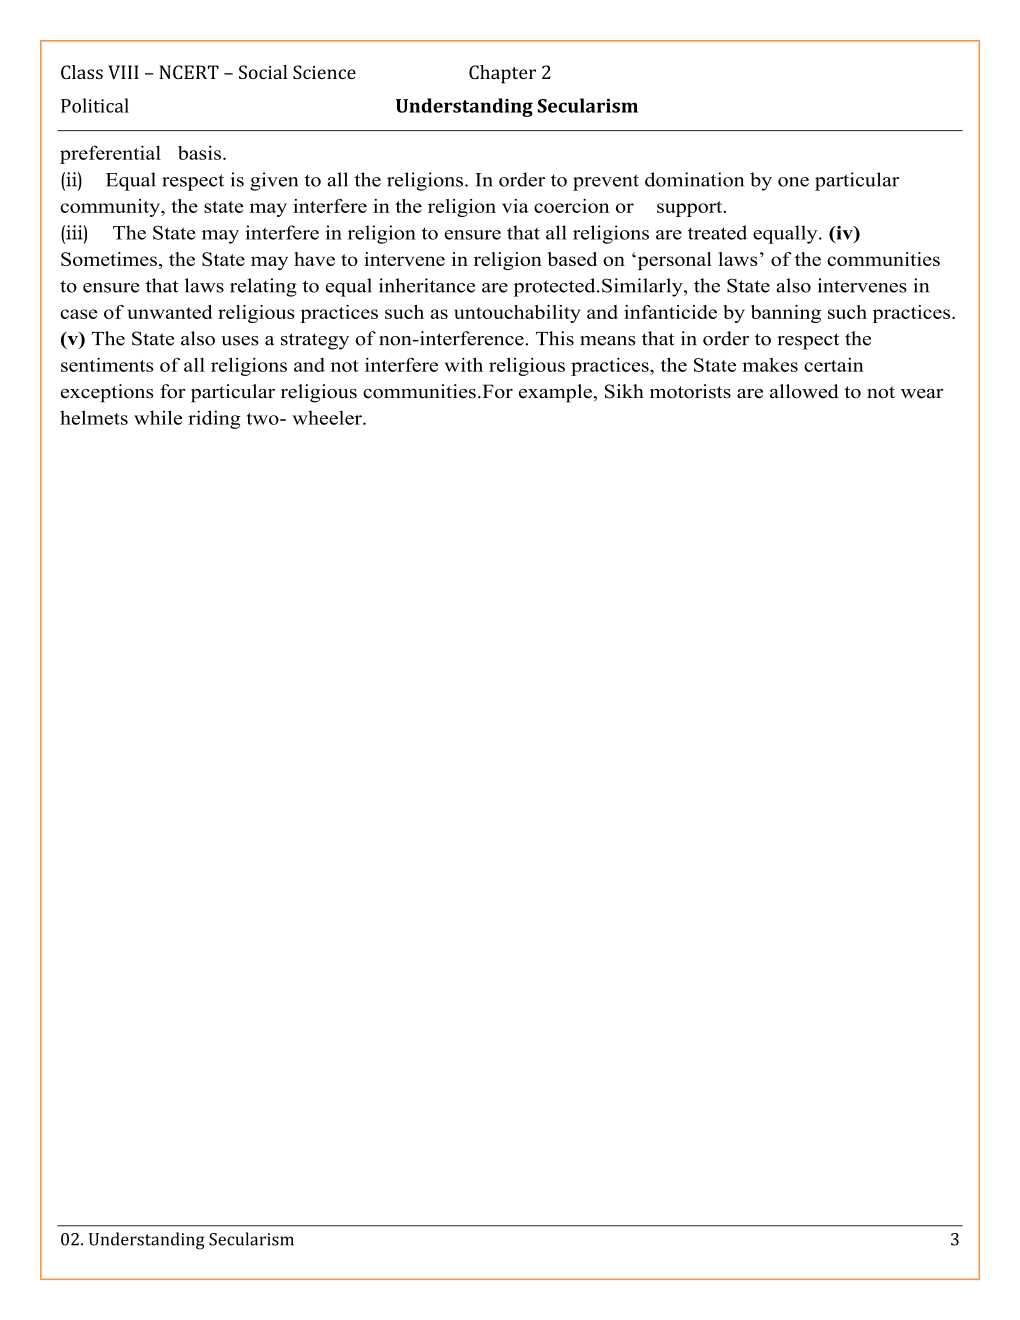 NCERT Solutions For Class 8 Social Science Social and Political Life Chapter 2 